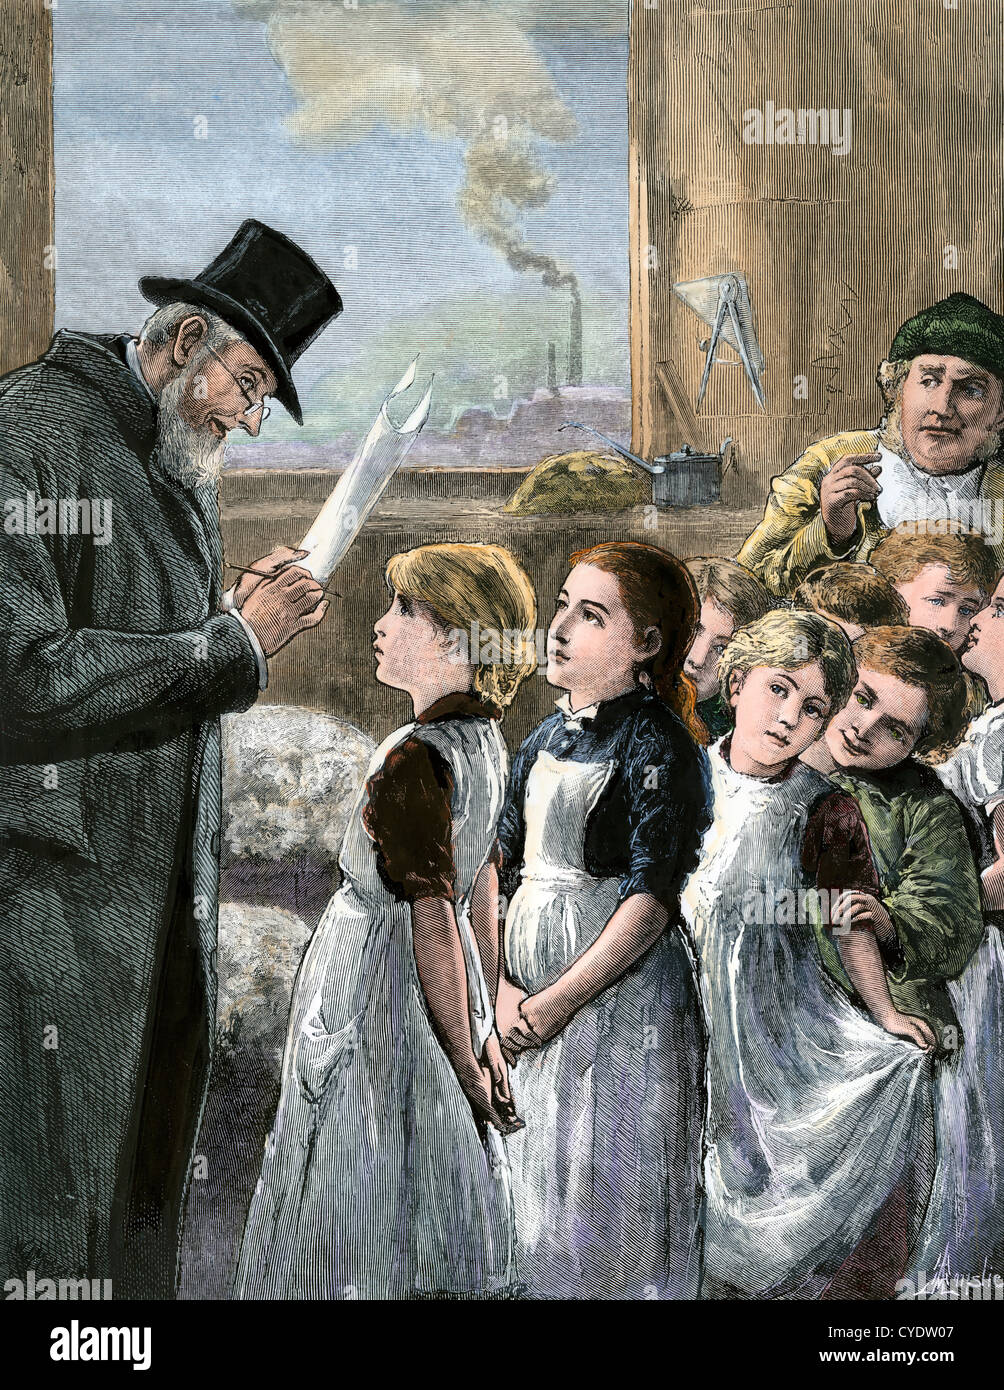 English government inspector visiting child workers in a factory, 1880s. Hand-colored woodcut Stock Photo